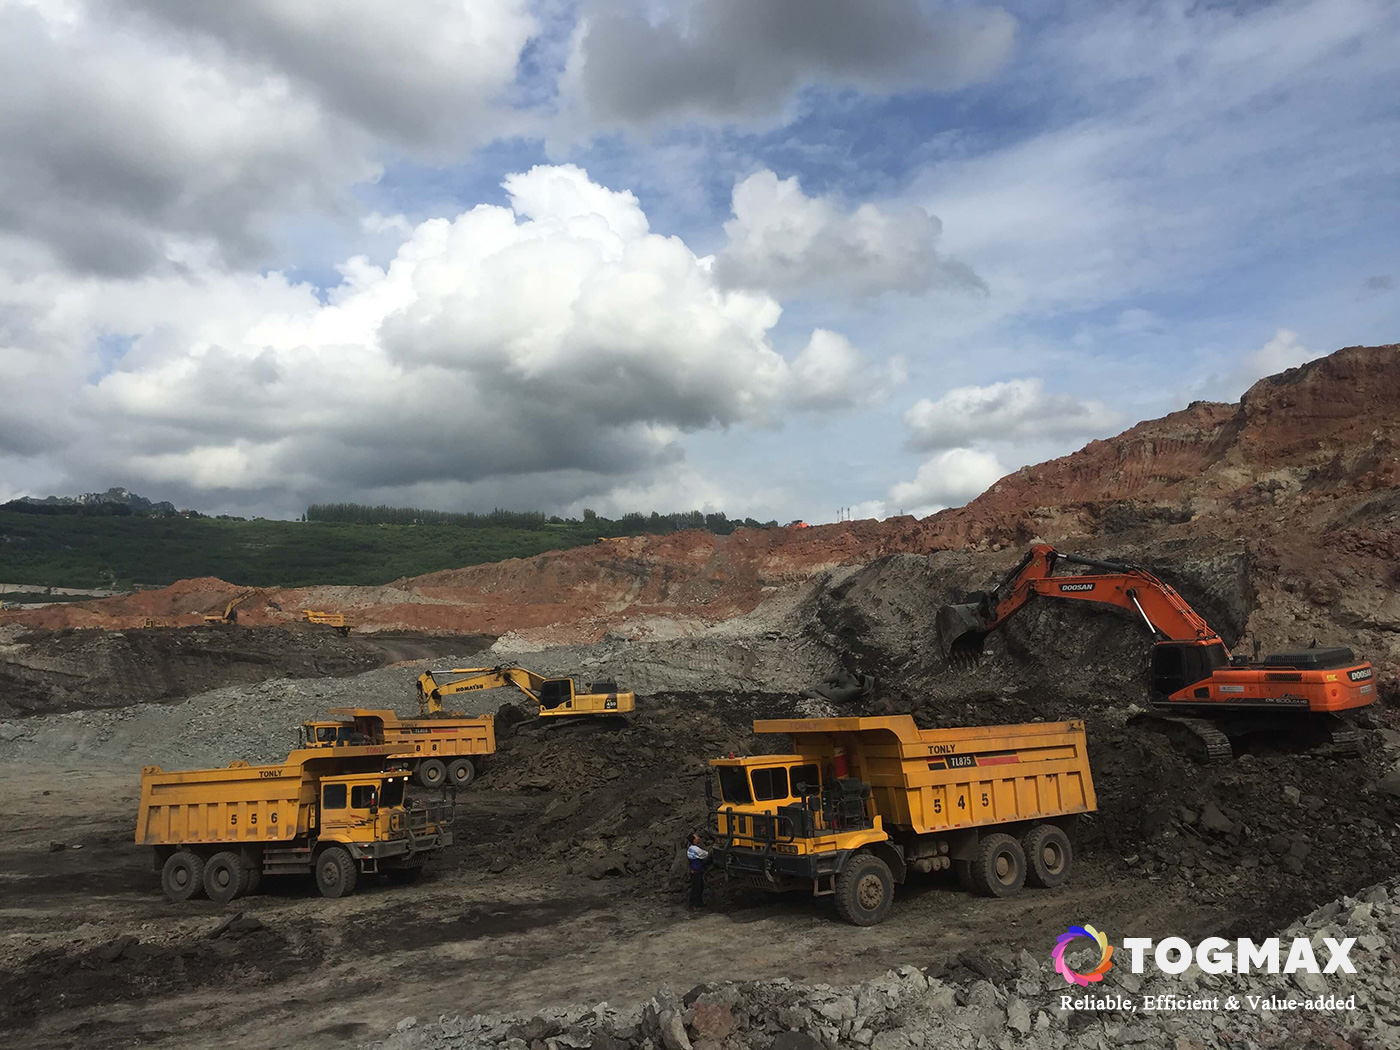 Tonly_TL875_6X4_Off_Highway_Mining_Wide_Body_Heavy_Duty_Dump_Trucks_in_African_Mine_Application-TogMax_Group